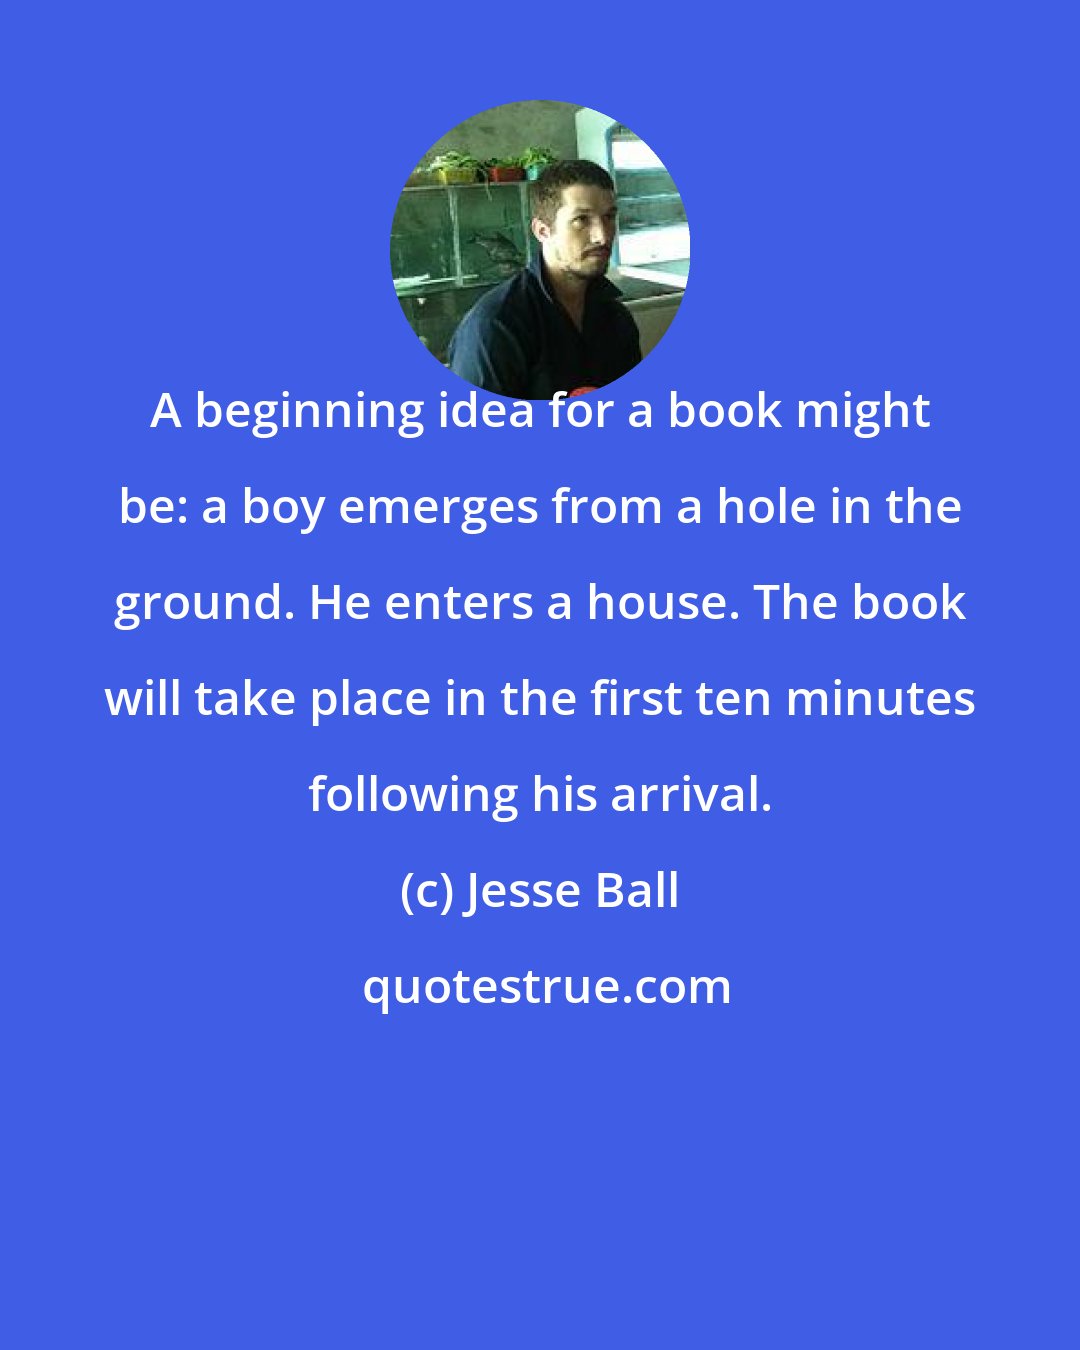 Jesse Ball: A beginning idea for a book might be: a boy emerges from a hole in the ground. He enters a house. The book will take place in the first ten minutes following his arrival.